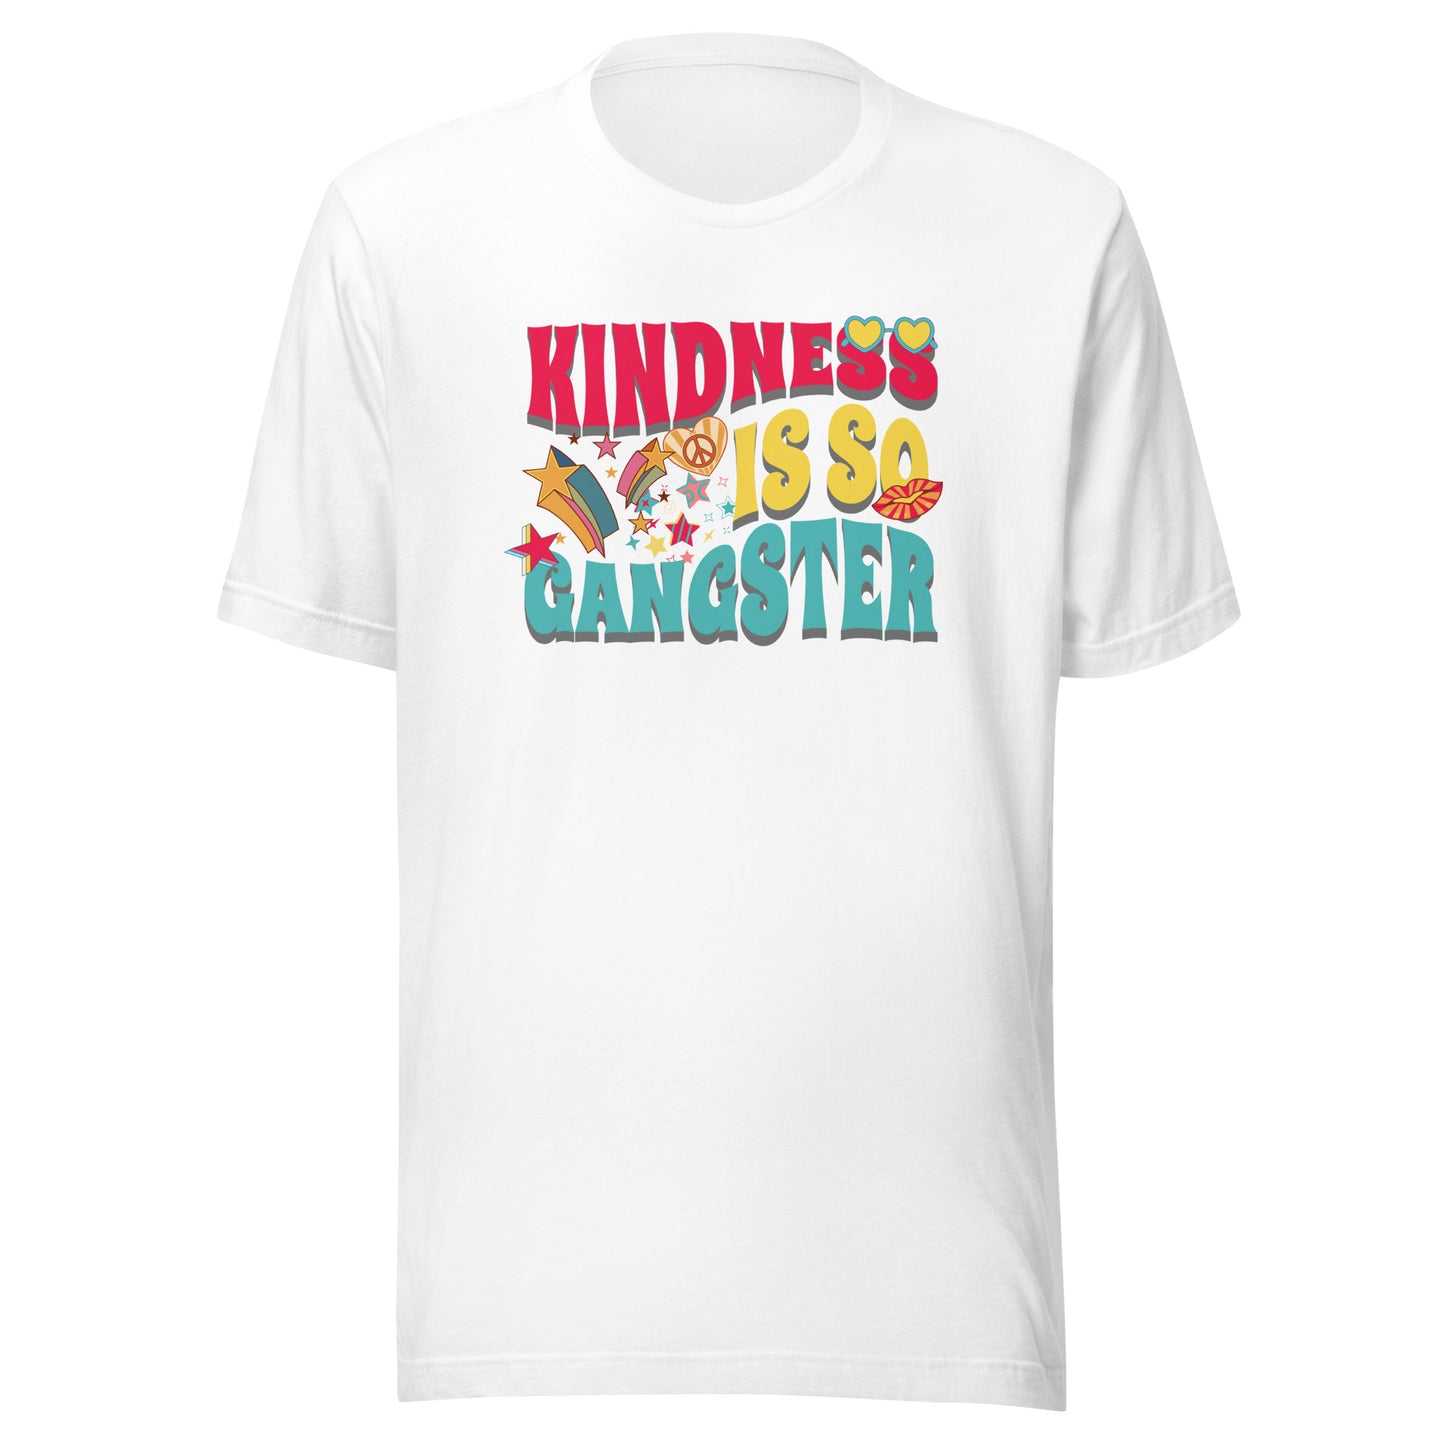 Kindness is so Gangster Unisex t-shirt